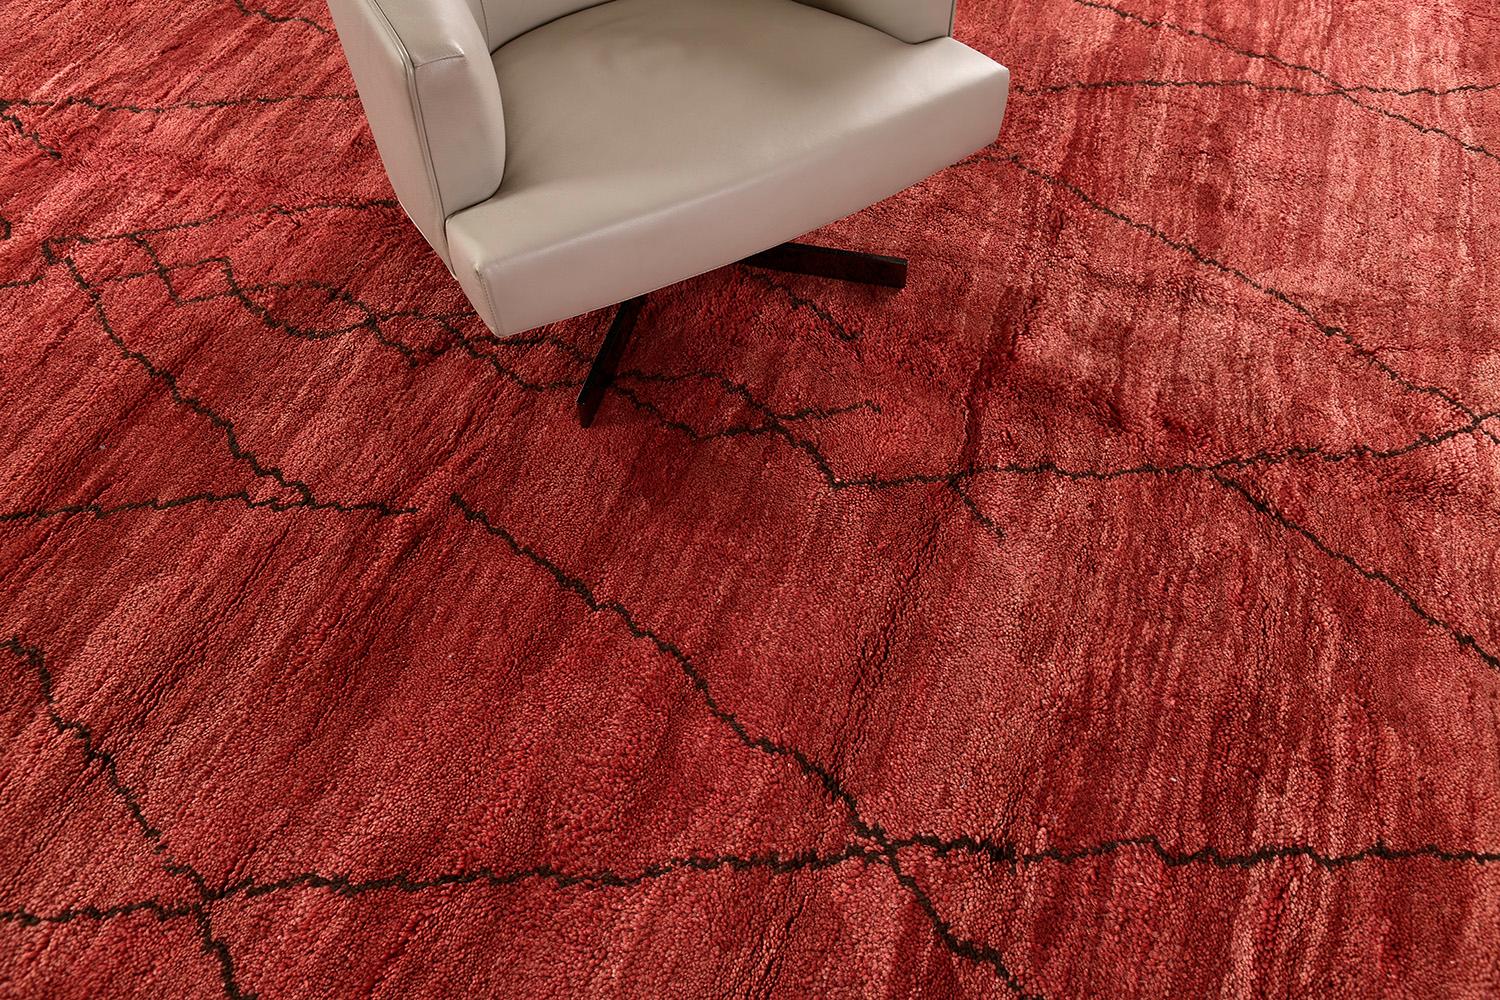 A remarkable tribal rug from our Middle Atlas Collection exhibits the symbolism including crisscross and diamonds. An interesting story narrated by the skillful weavers that are open to interpretation. Knotted in shades of vibrant red and brown. A